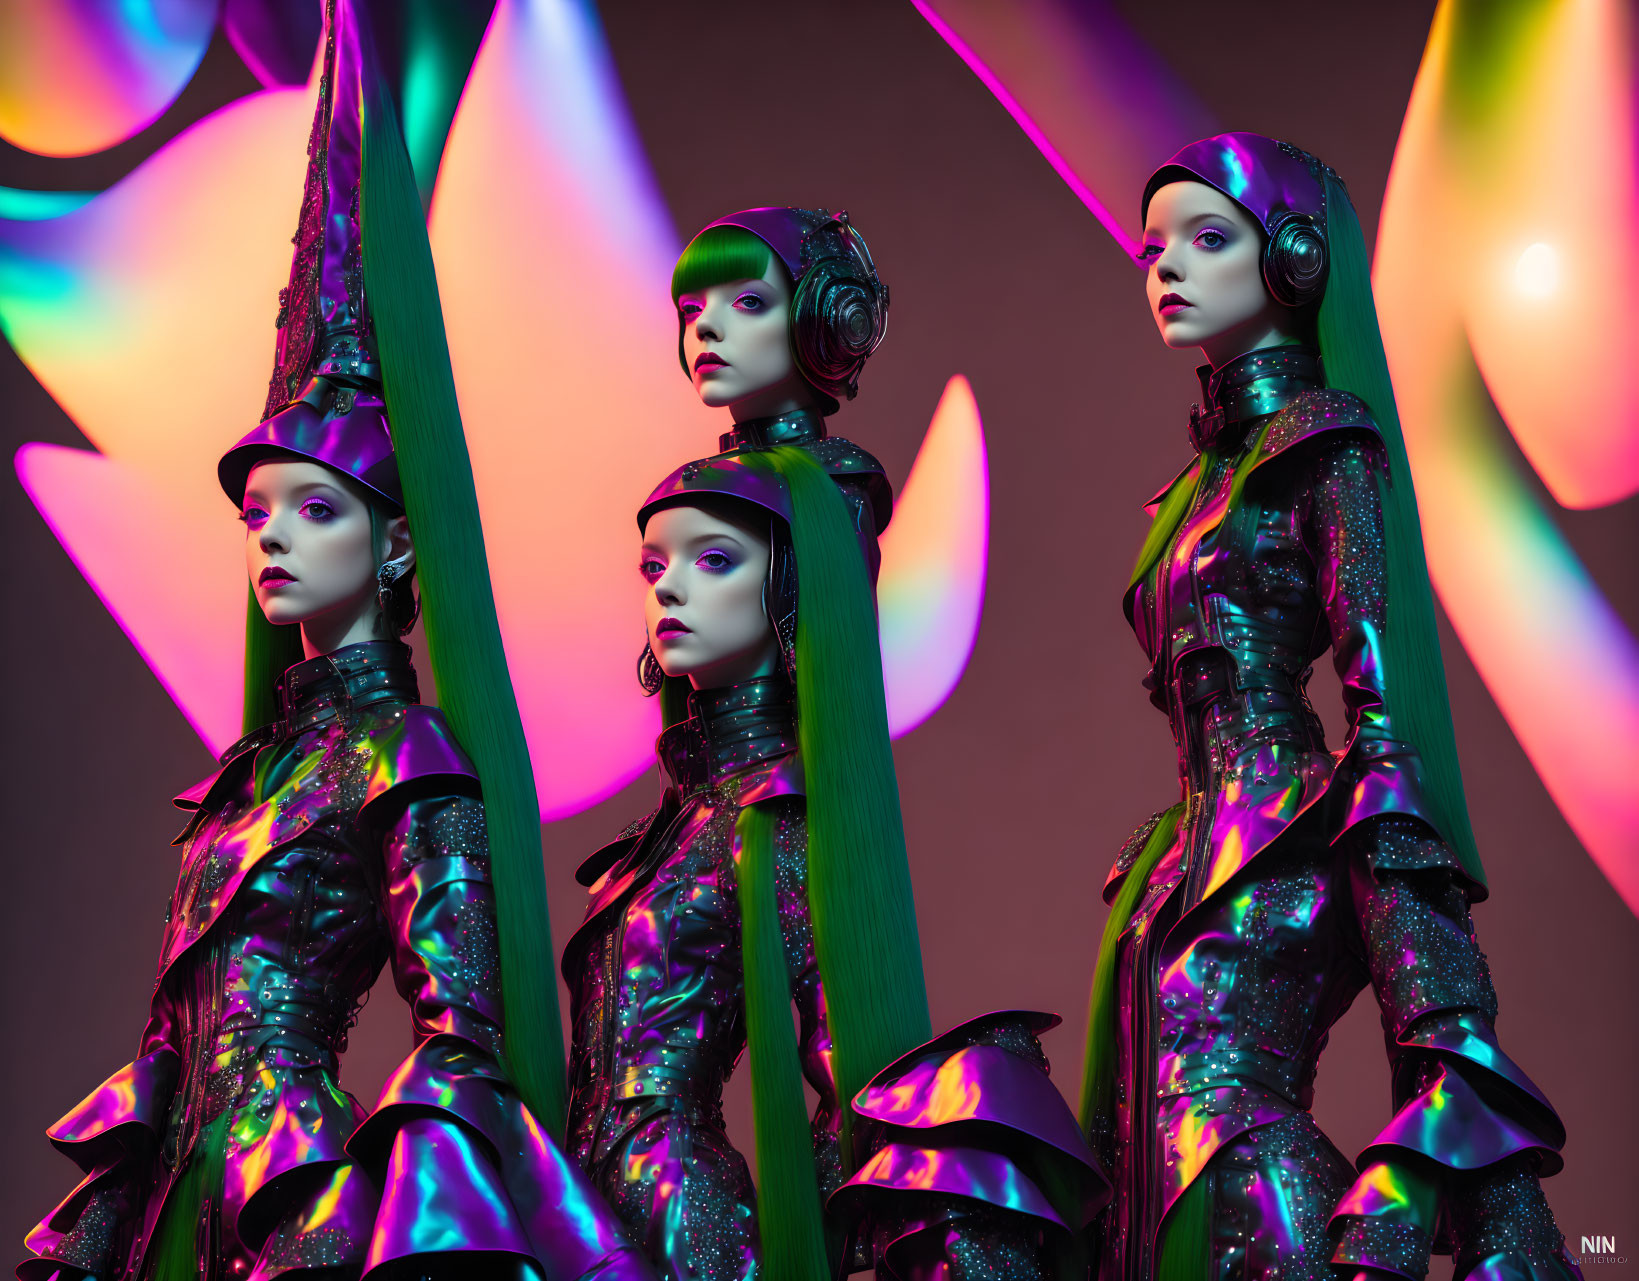 Abstract futuristic female figures in metallic outfits on colorful background